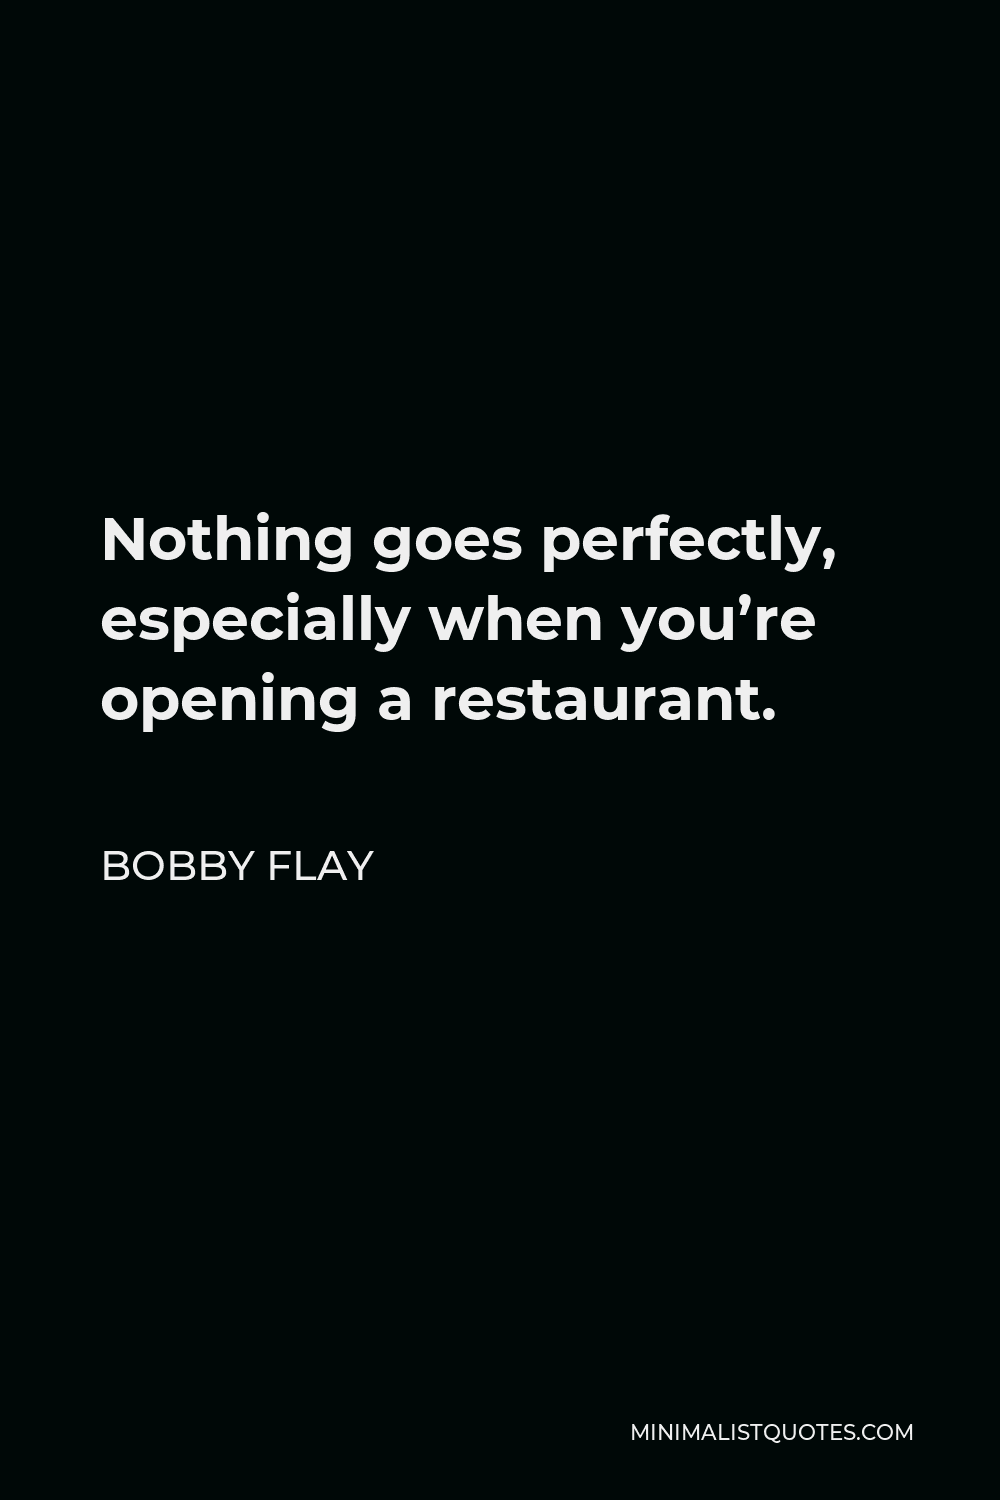 Bobby Flay Quote - Nothing goes perfectly, especially when you’re opening a restaurant.